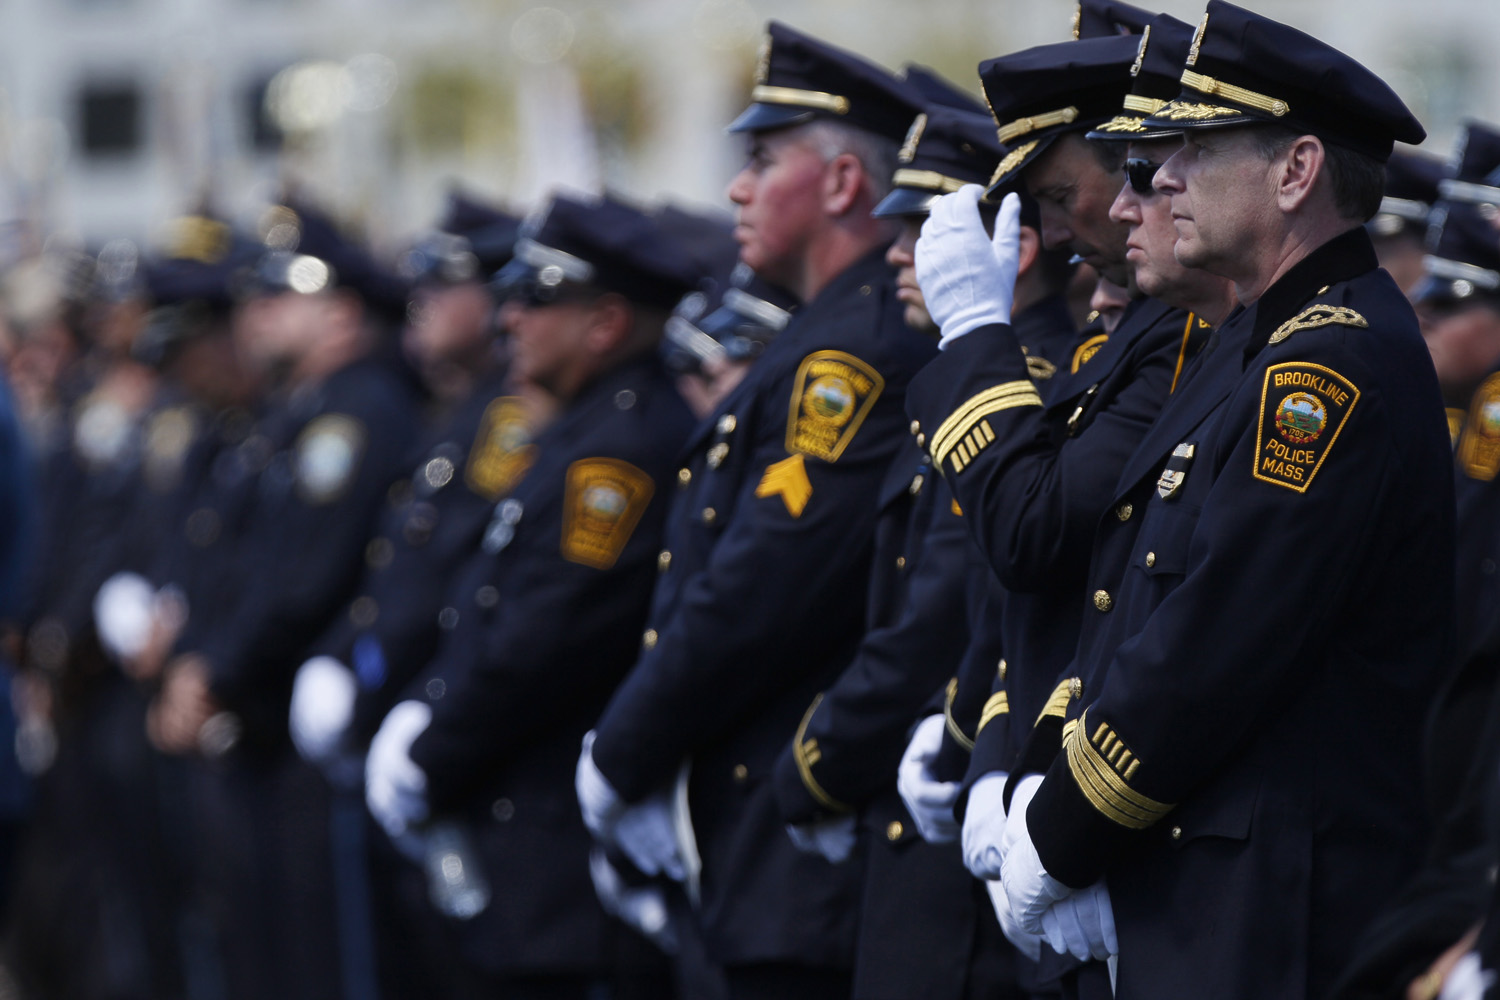 Law enforcement officers during a memorial service for police officer Sean Collier.